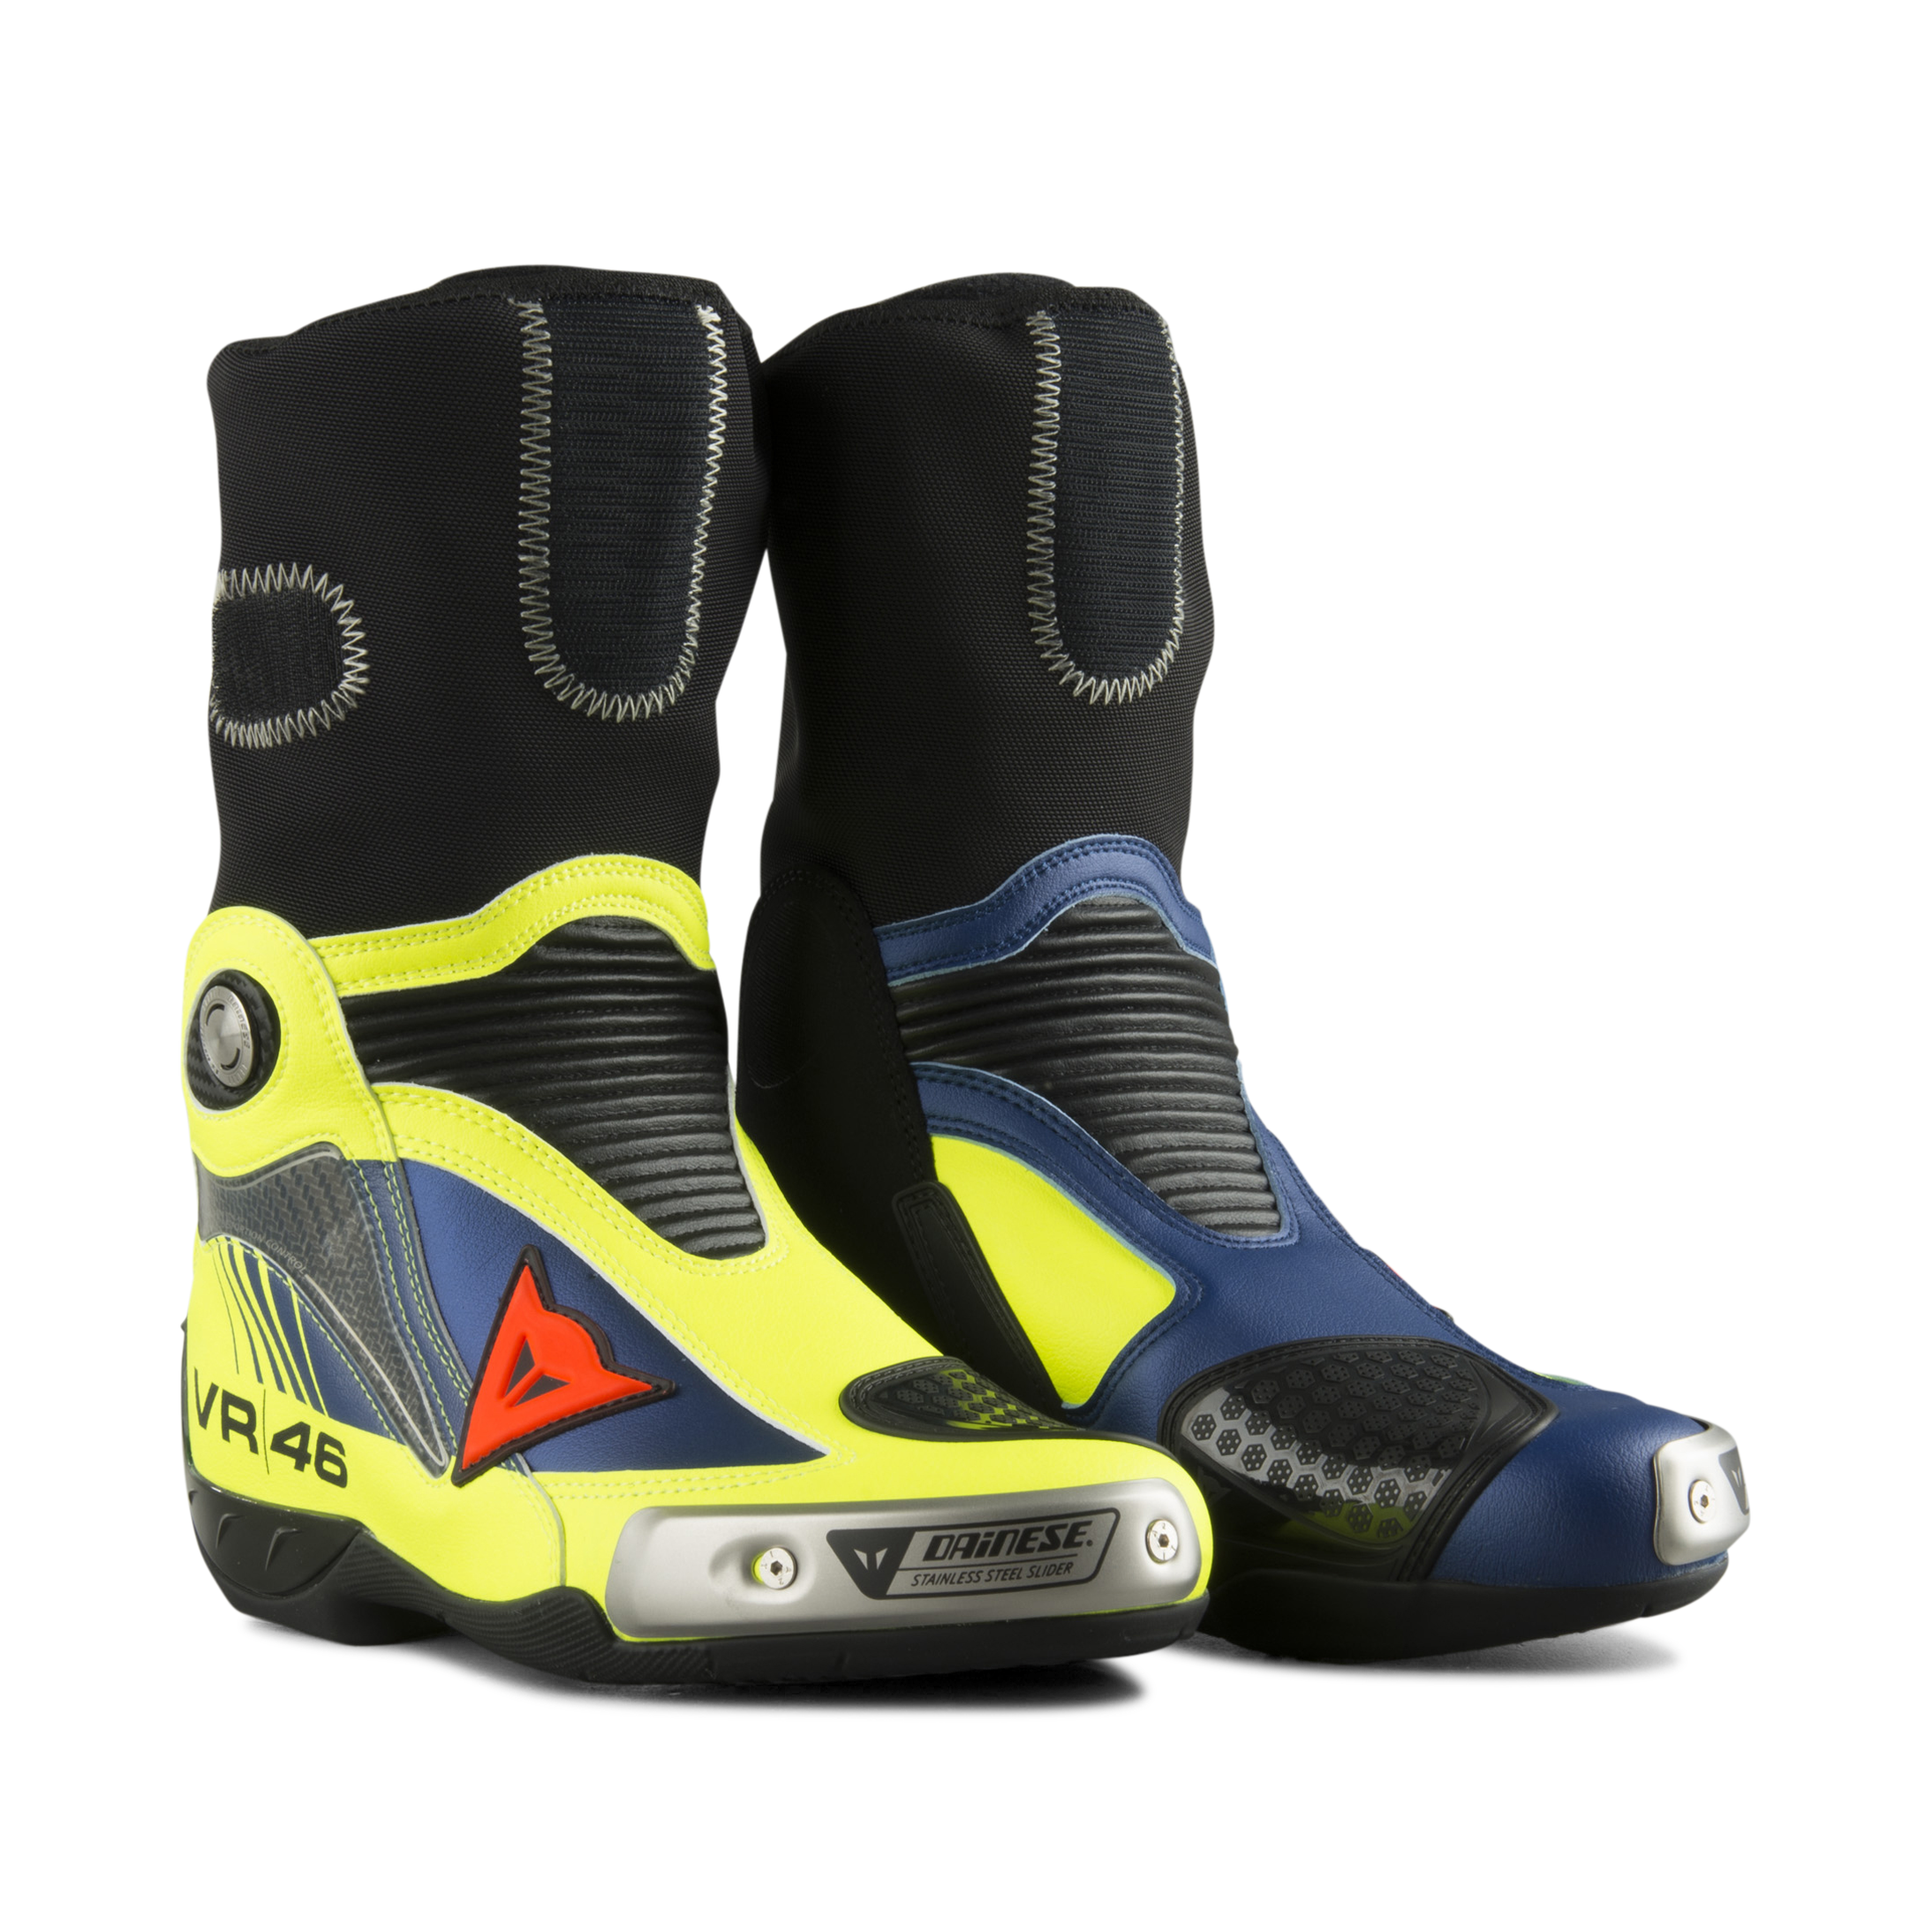 rossi dainese boots